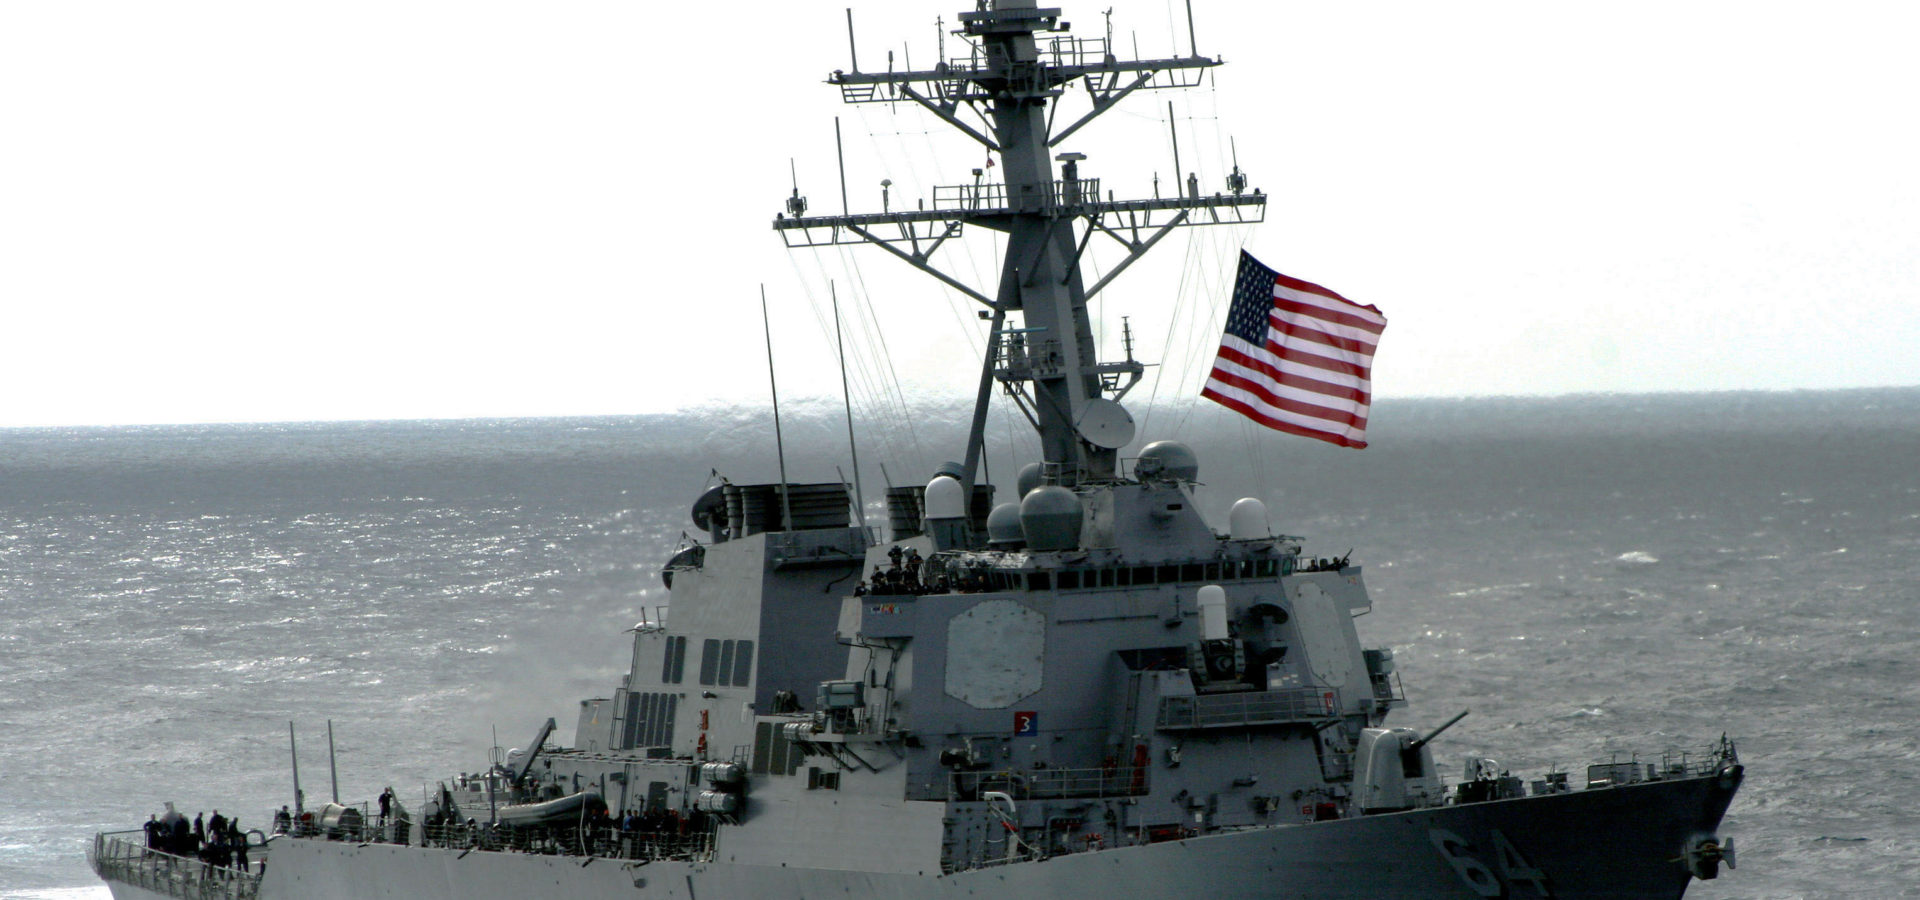 The US Navy Guided Missile Destroyer, the USS CARNEY is en route to Sirte, Libya as US forces bolster their presence in the country.